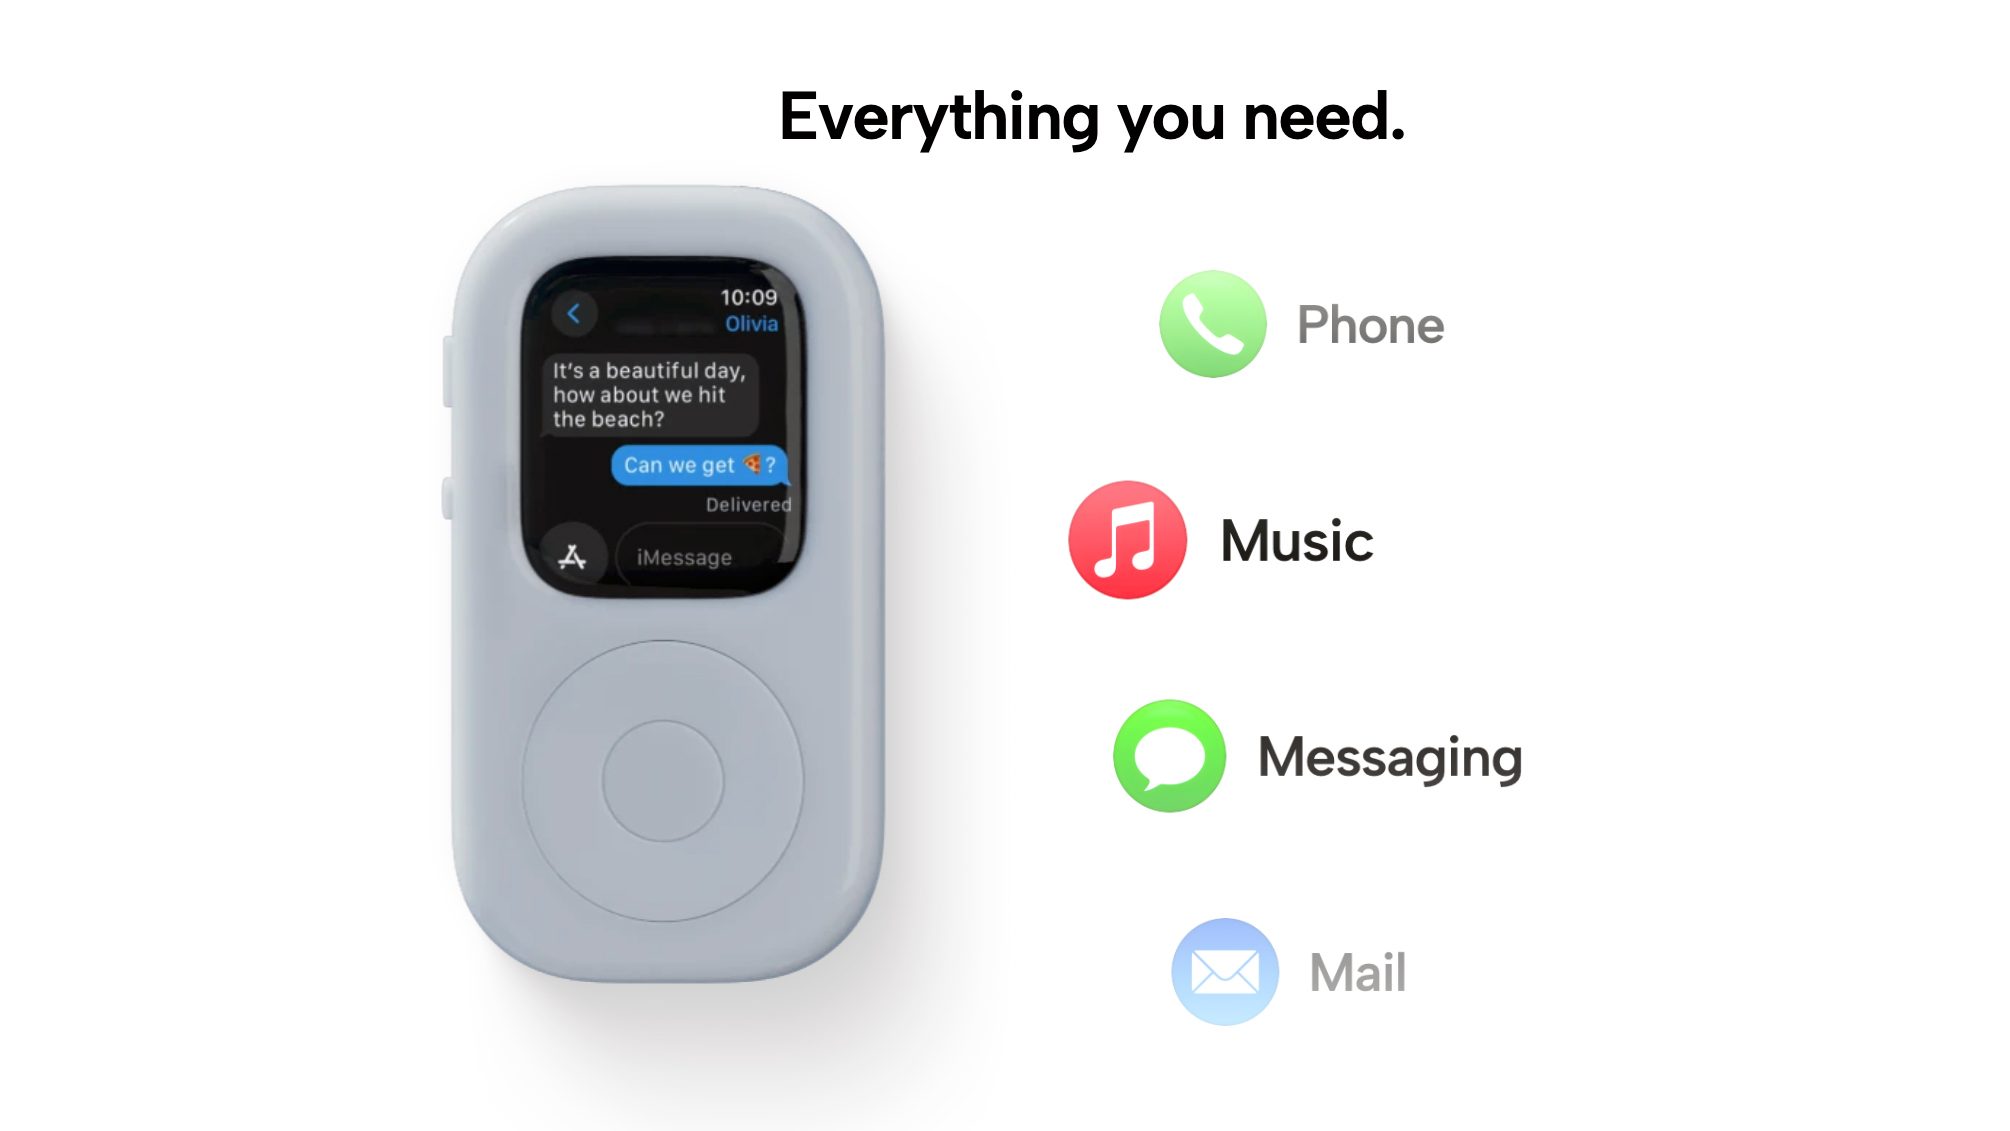 Marketing screenshot for the tinyPod. The iPod-like device sits next to icons for Phone, Music, Messaging and Mail, demonstrating its capabilities. White background.